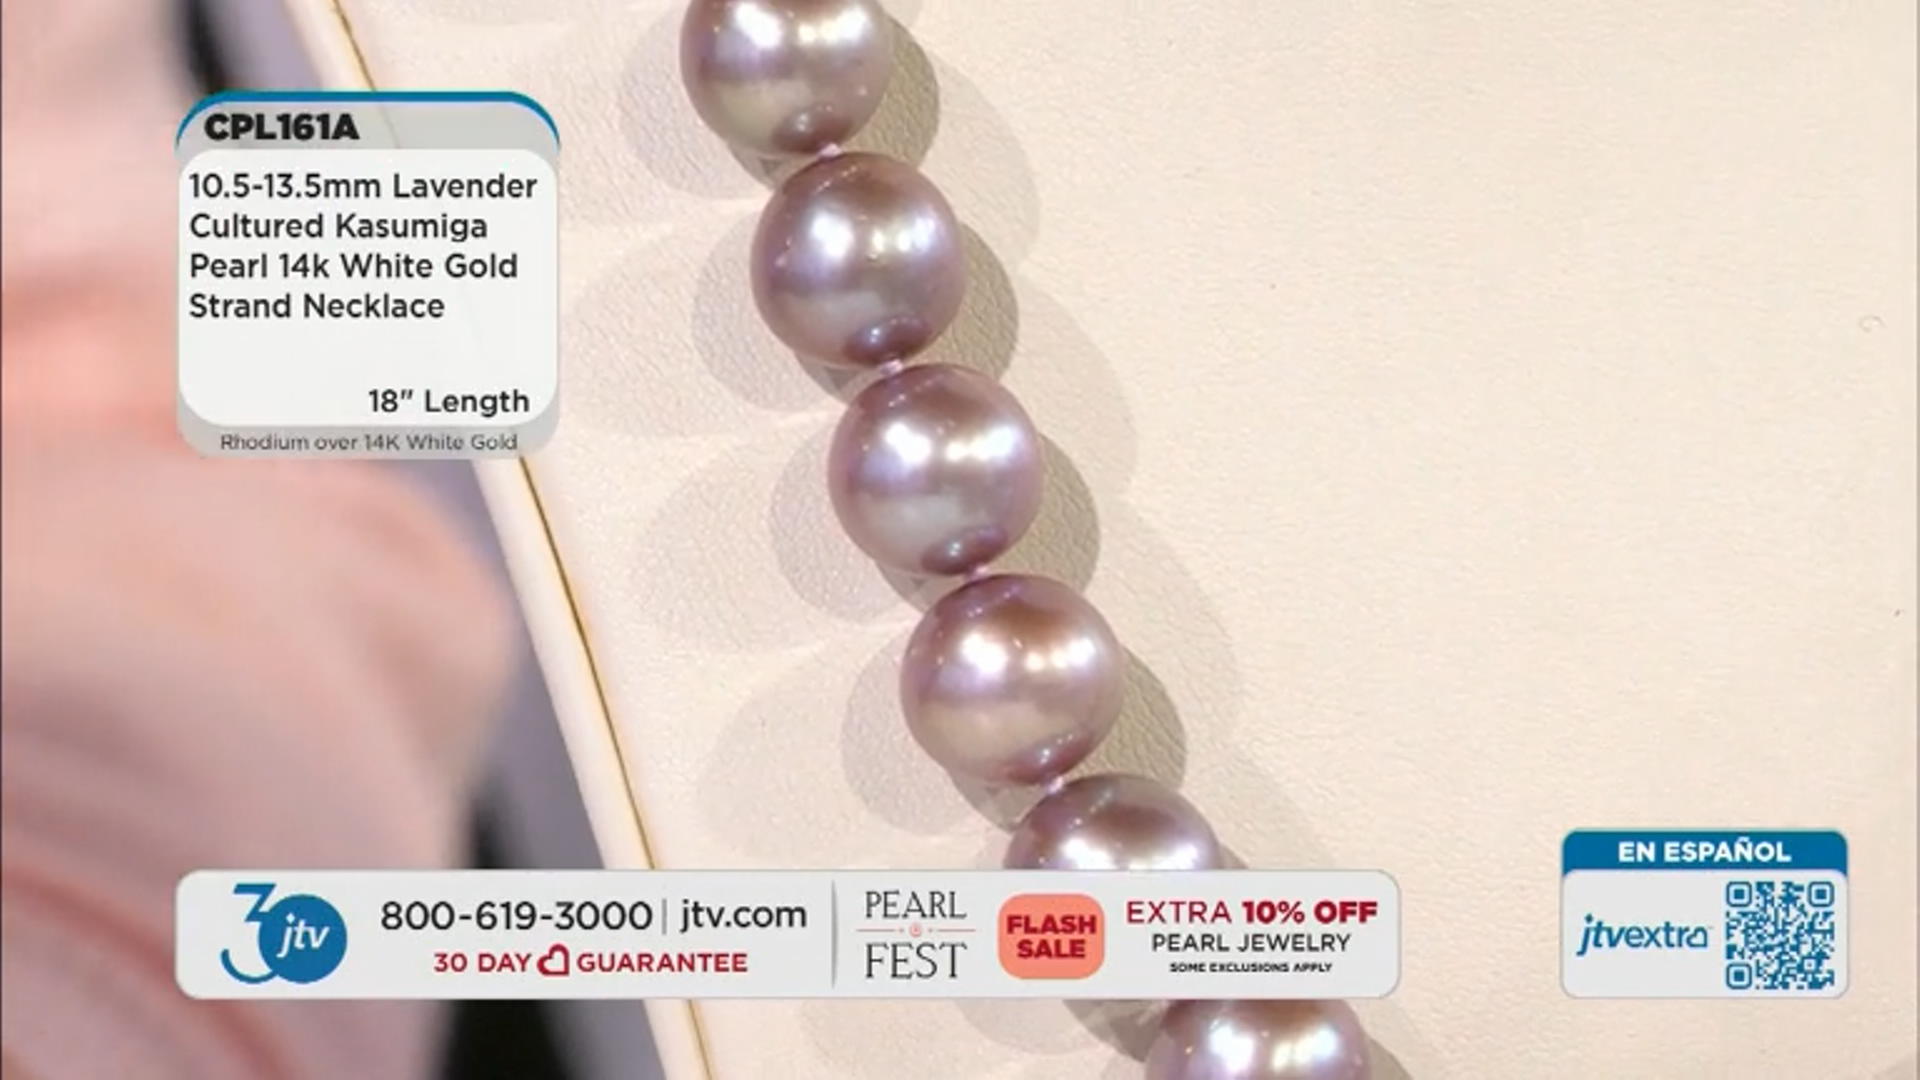 Lavender Cultured Kasumiga Pearl 14k White Gold Strand Necklace 10.5-13.5mm Video Thumbnail